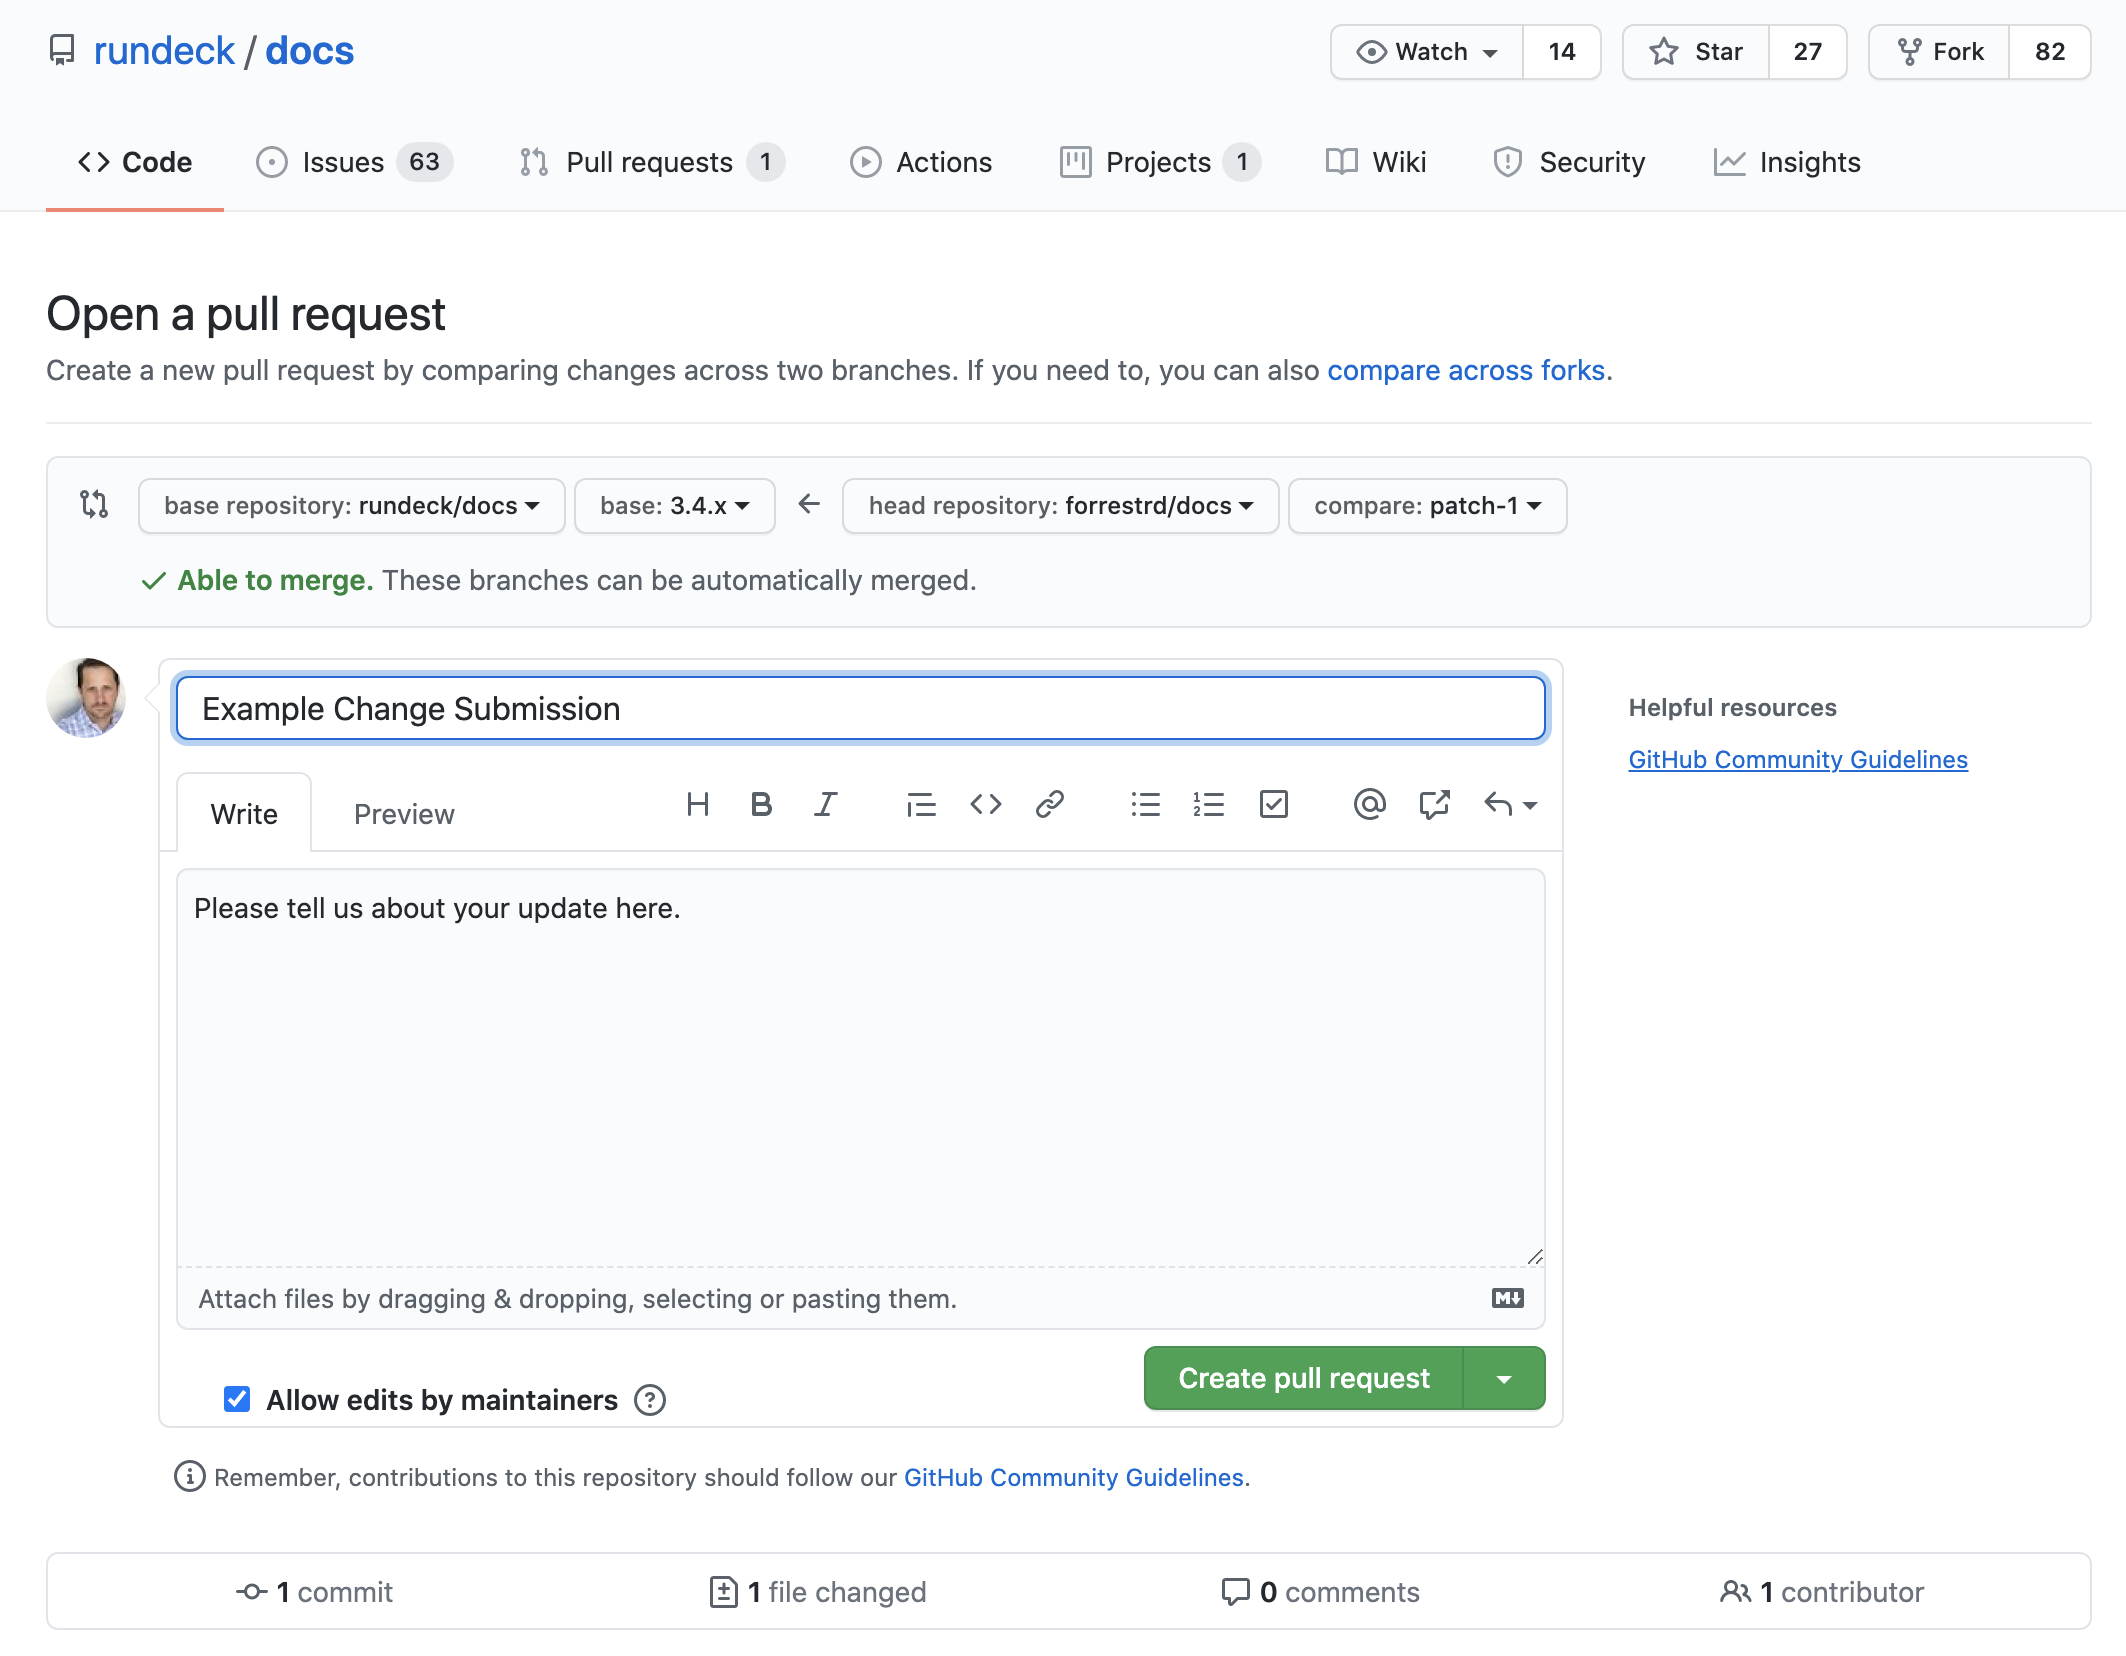 Submit Pull Request